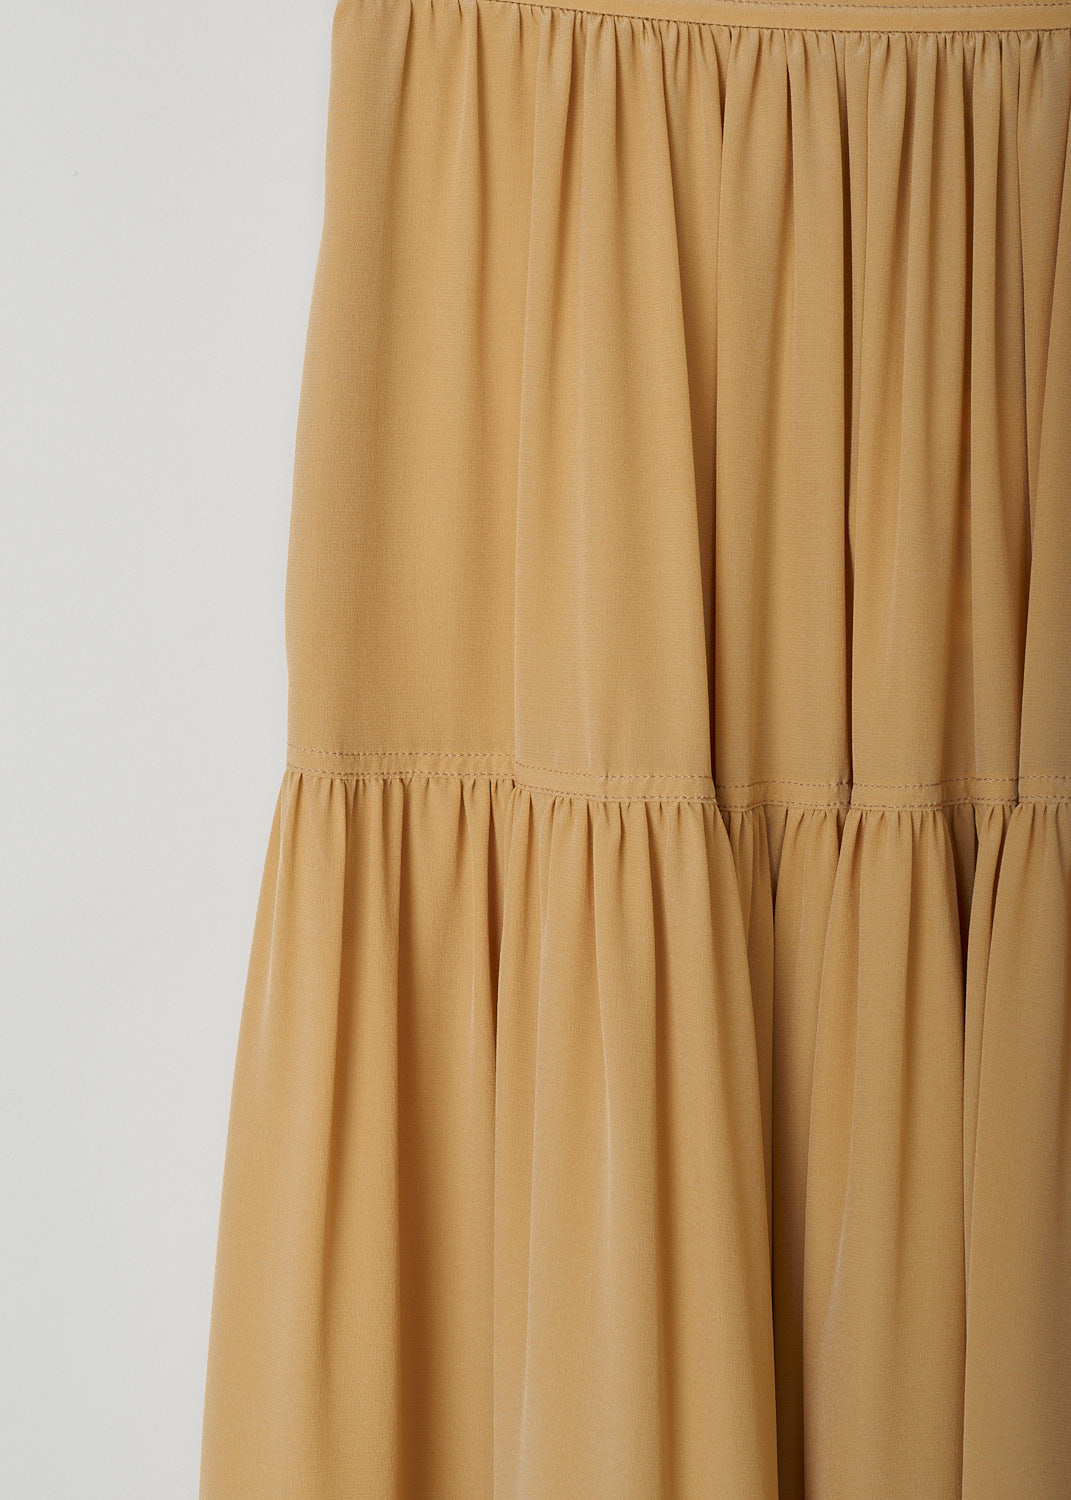 CHLOÃ‰, PEARL BEIGE TIERED MAXI SKIRT, CHC22UJU03004278, Beige, Detail, This pearl beige tiered pleated maxi skirt has a narrow waistband. A concealed side zip functions as the closure option.
 
